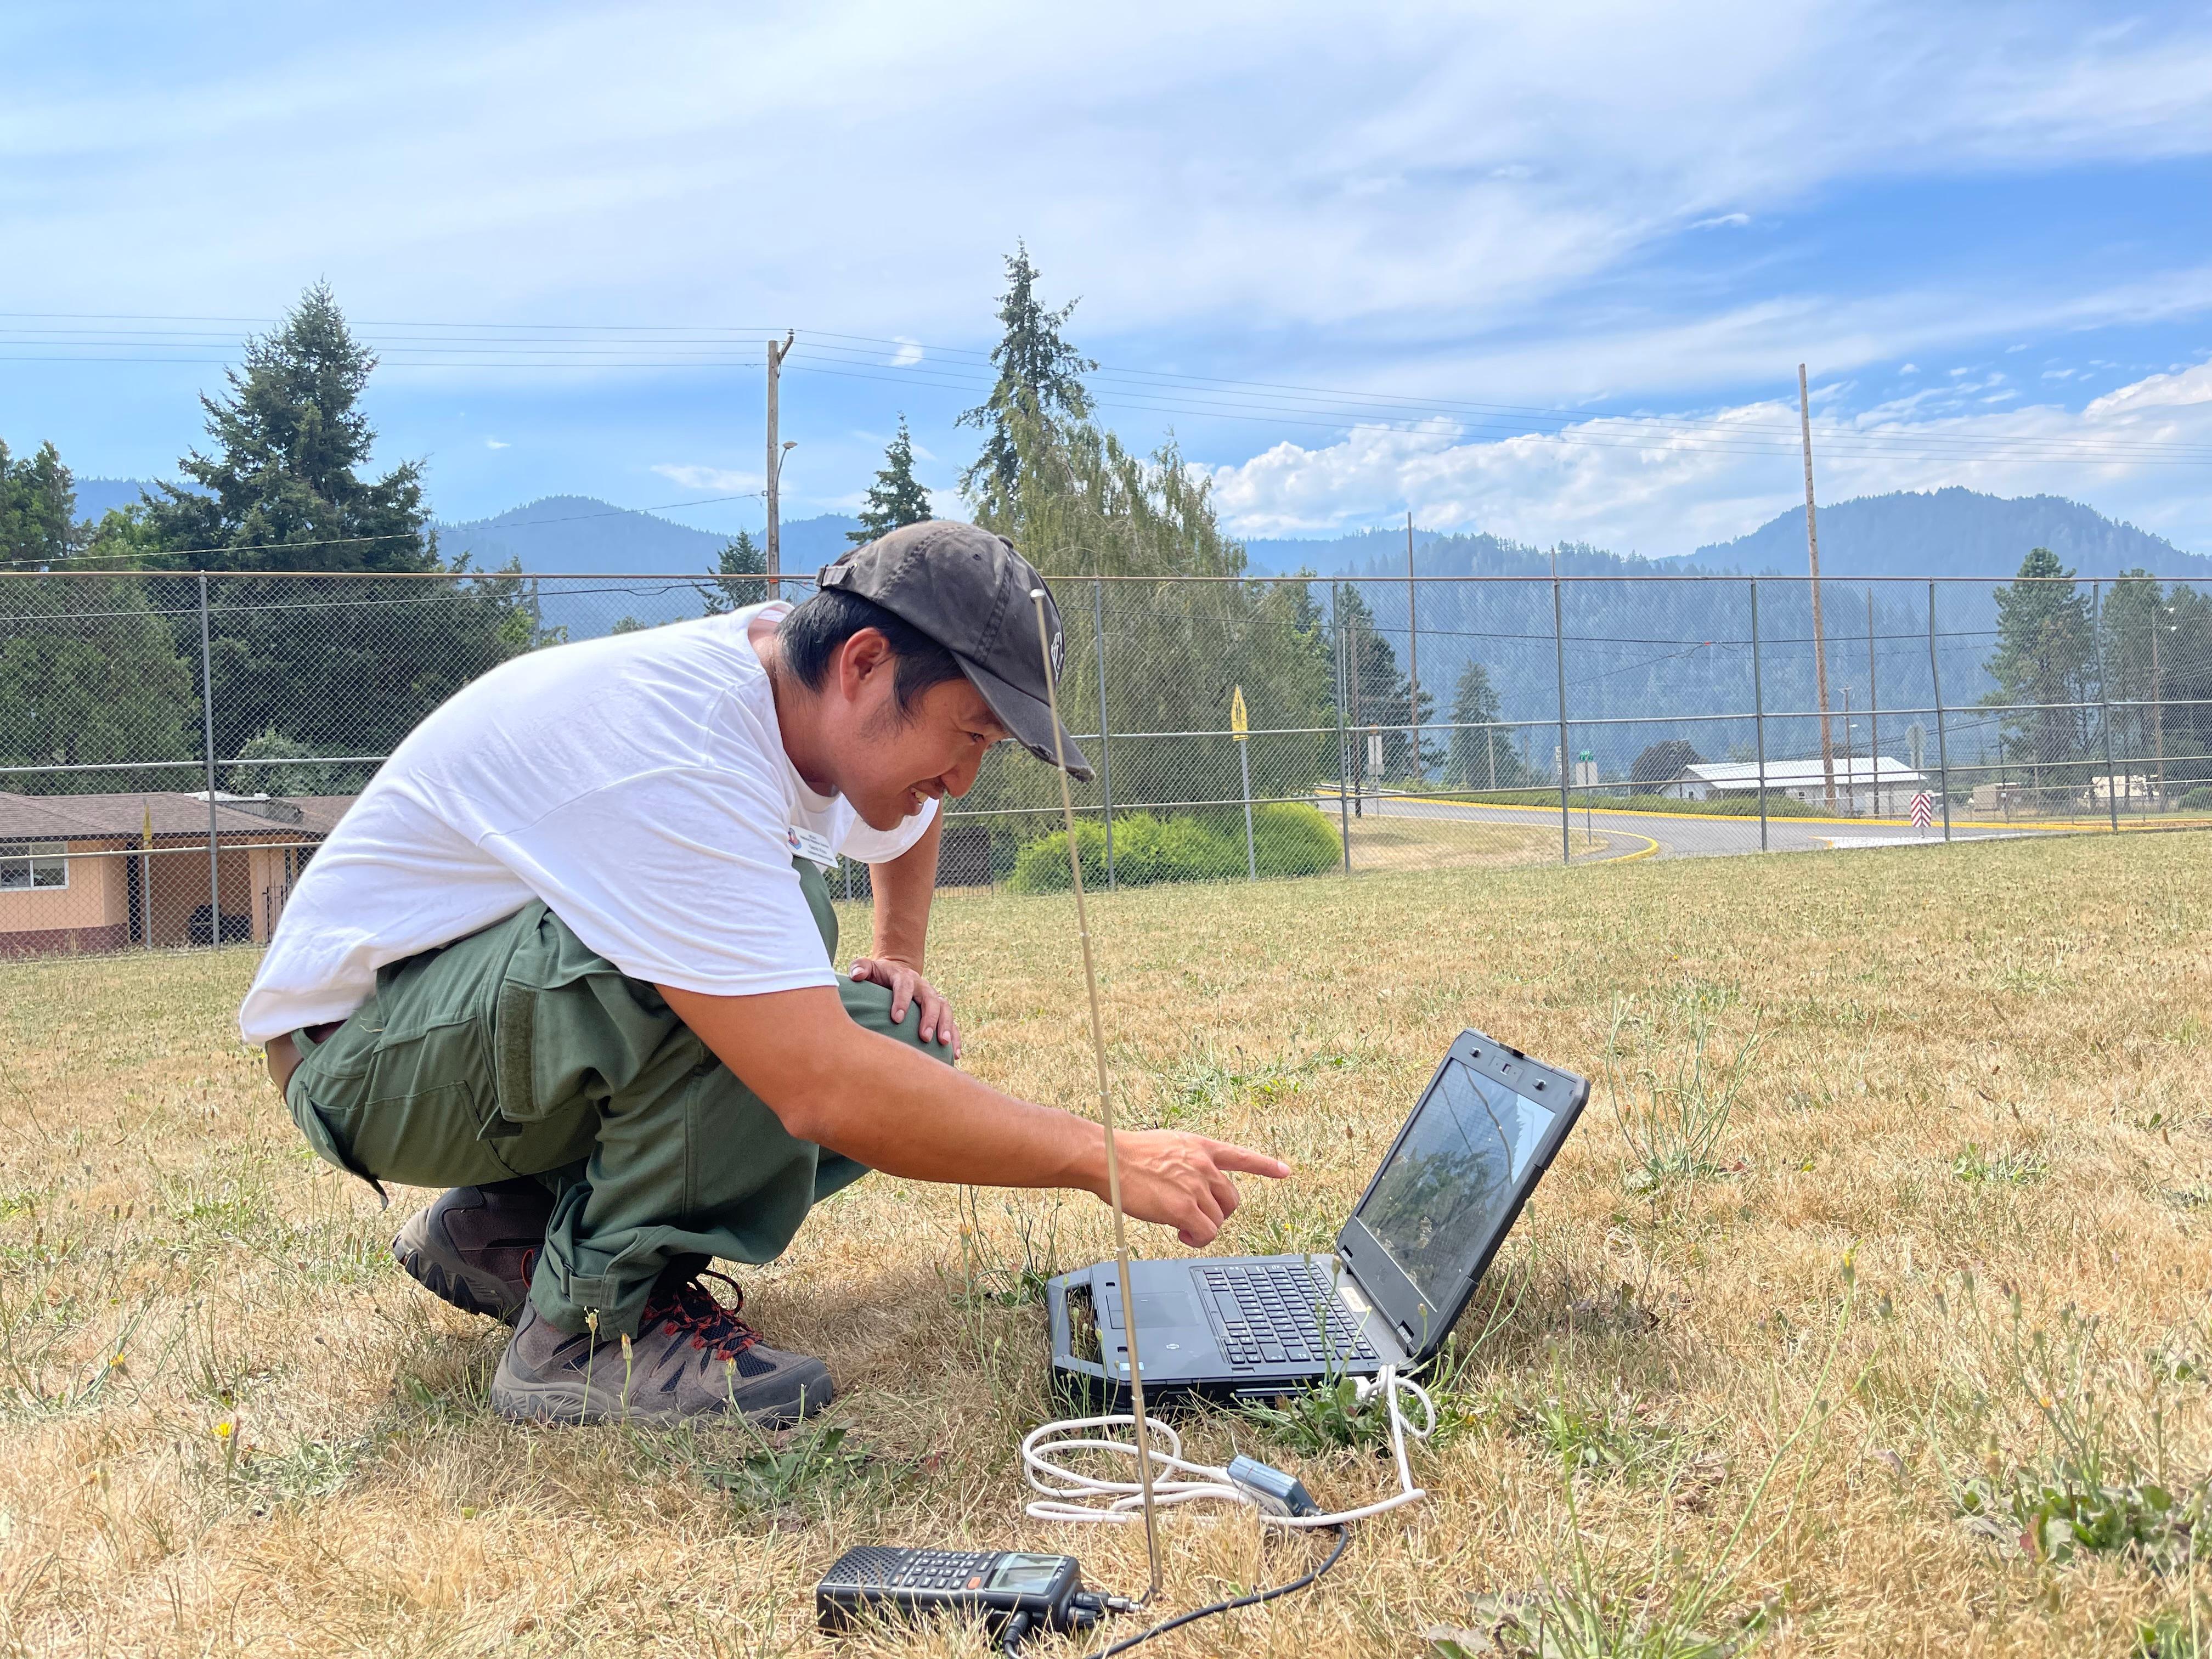 Incident Meteorologists like Genki Kino launch weather balloons on the Cedar Creek Fire to collect site-specific data that may be difficult to get. The instrument is tracked by a radio receiver and transmits data that includes temperature.